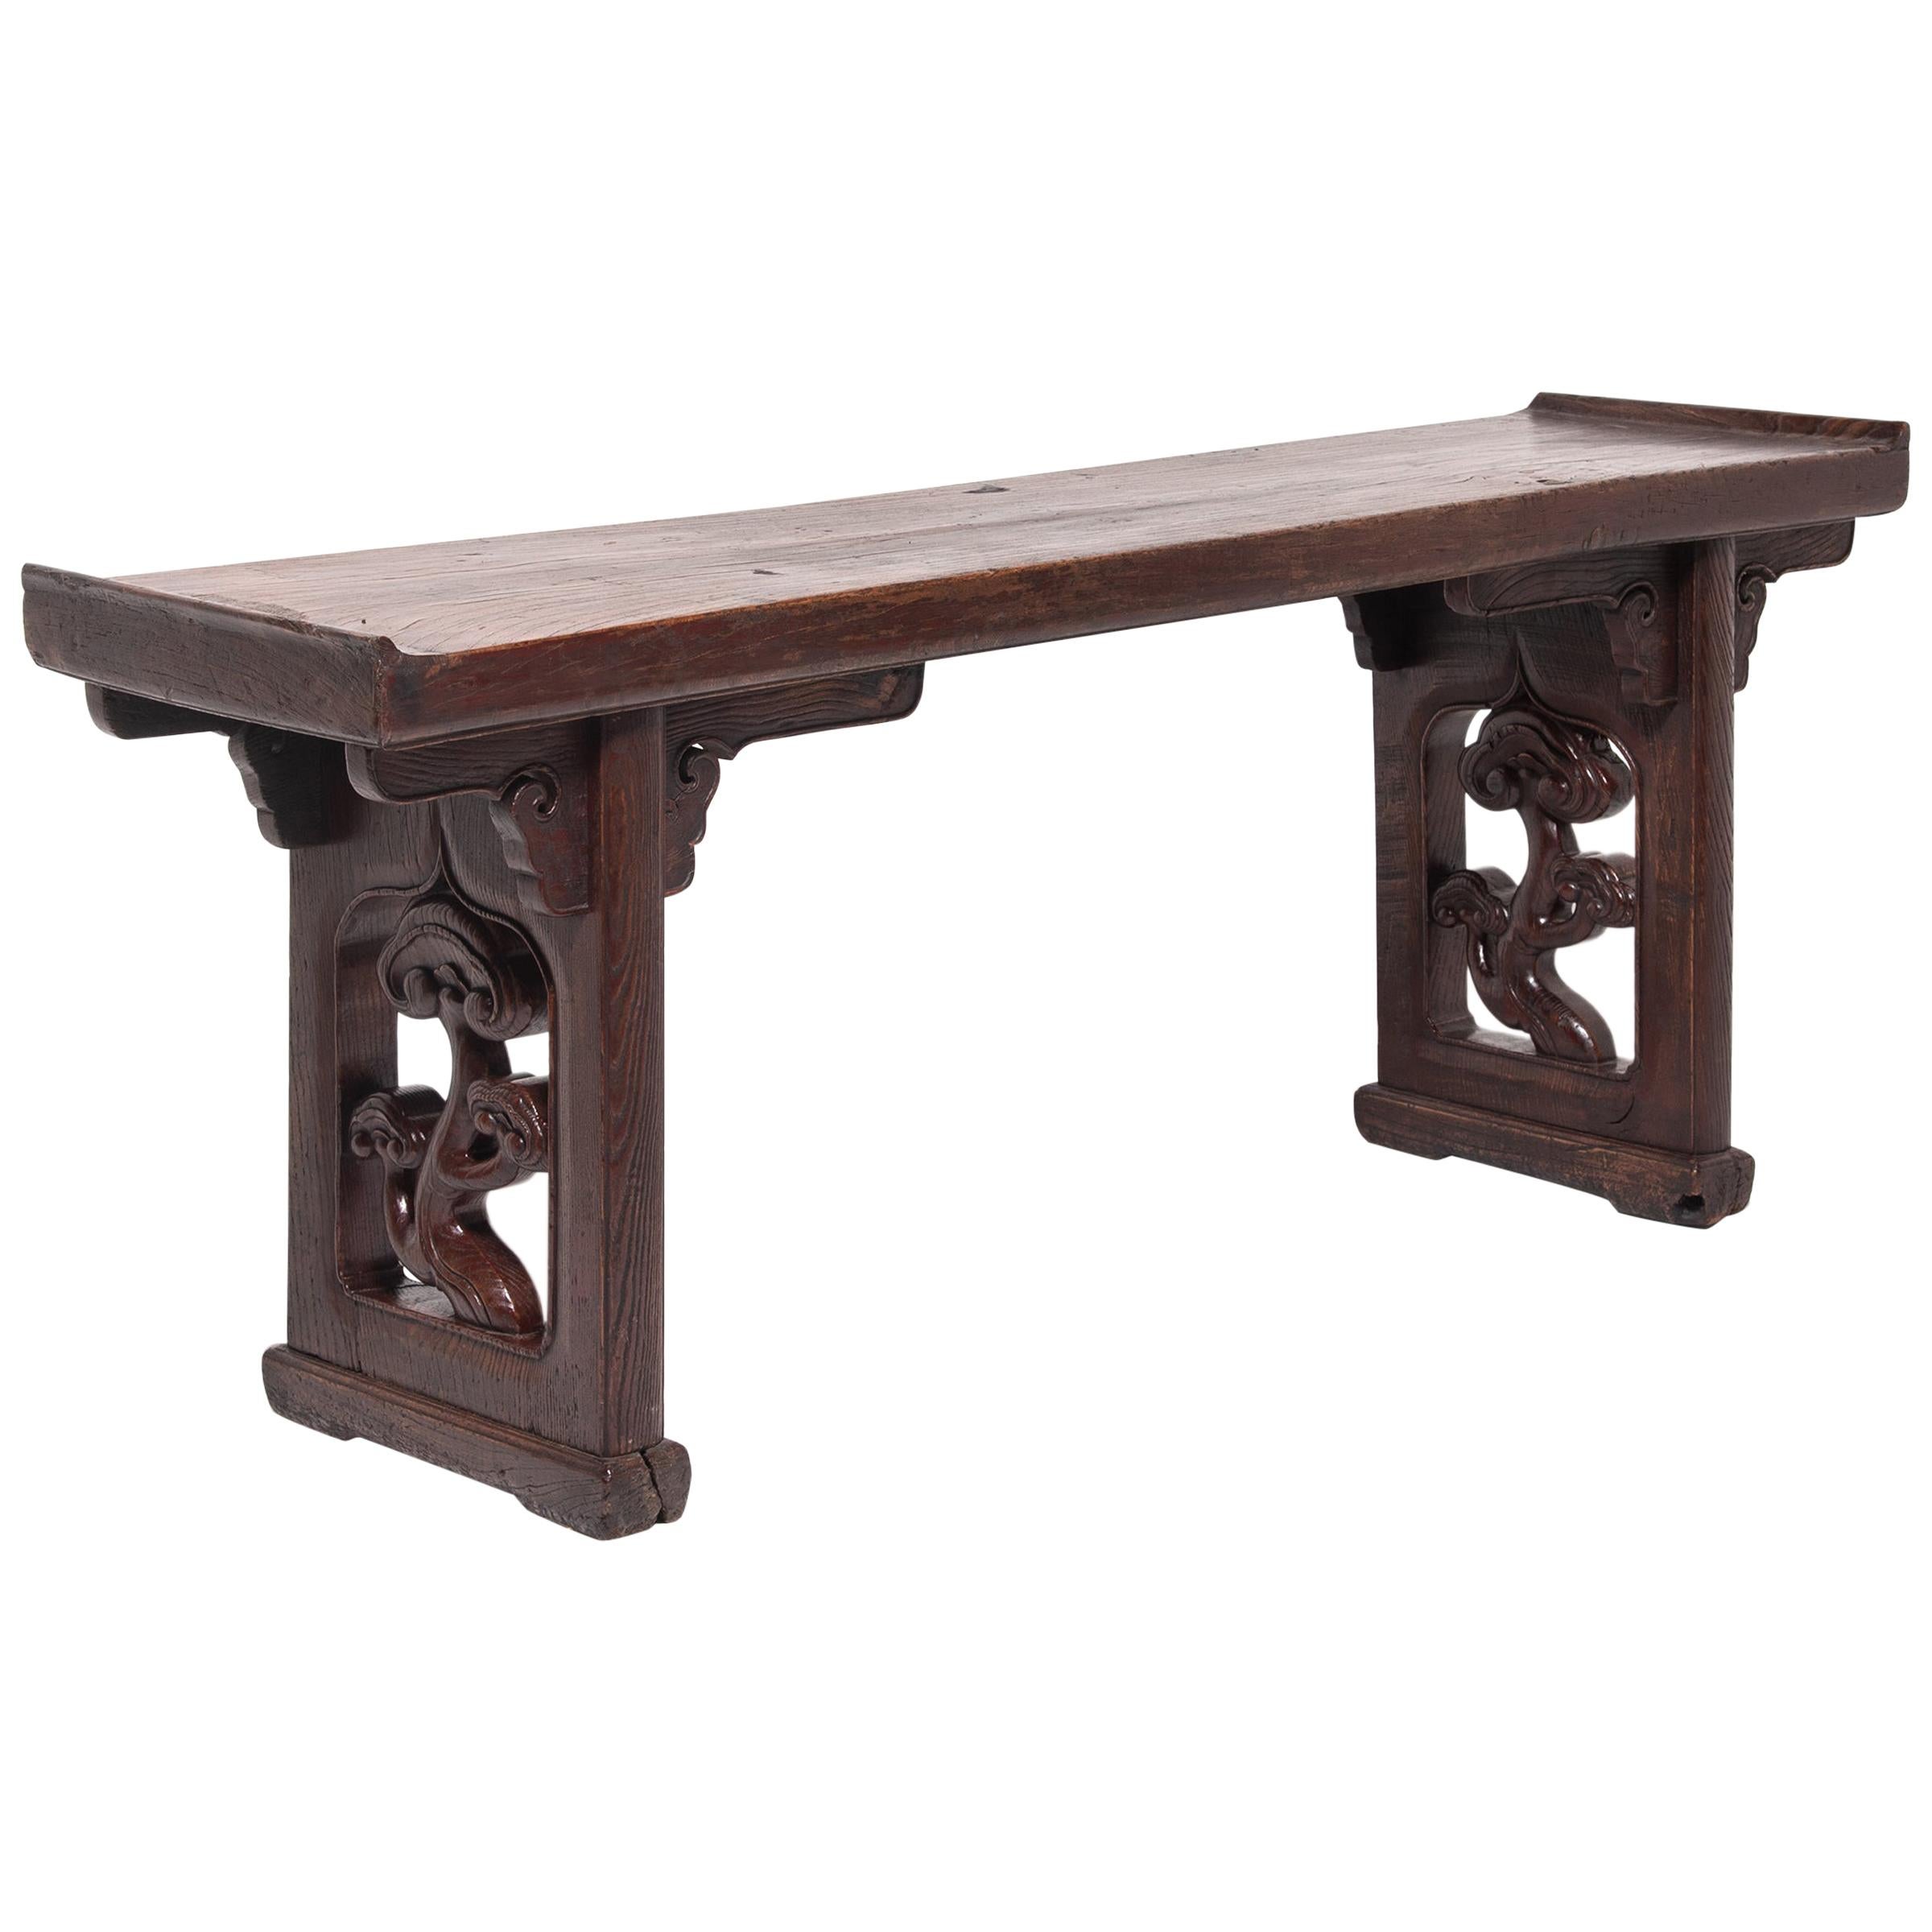 Chinese Plank Top Ruyi Altar Table, circa 1800 For Sale